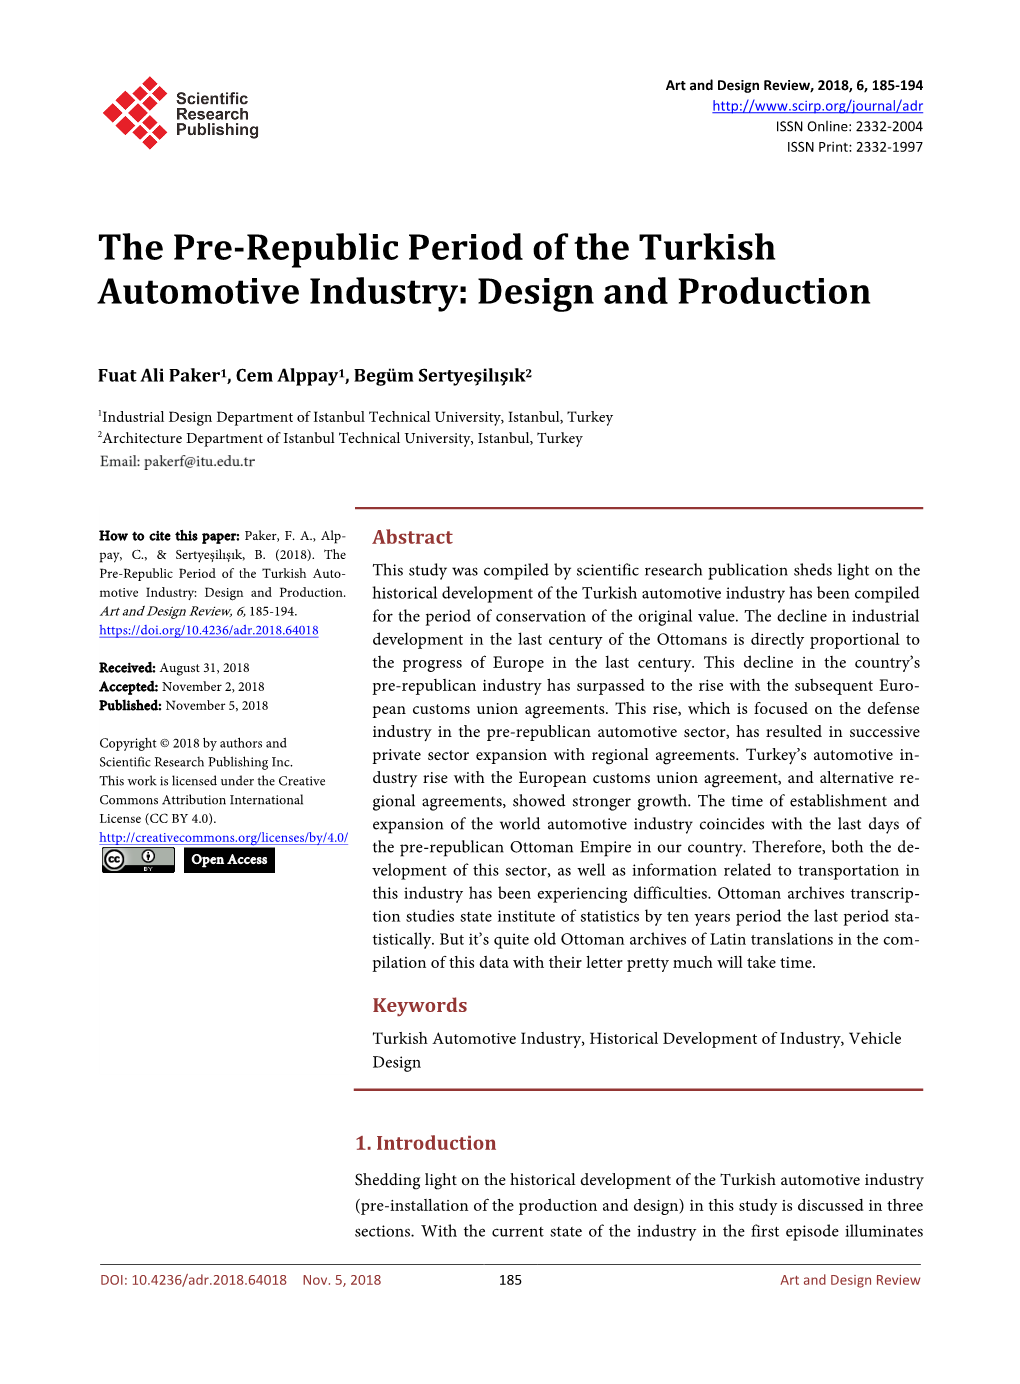 The Pre-Republic Period of the Turkish Automotive Industry: Design and Production